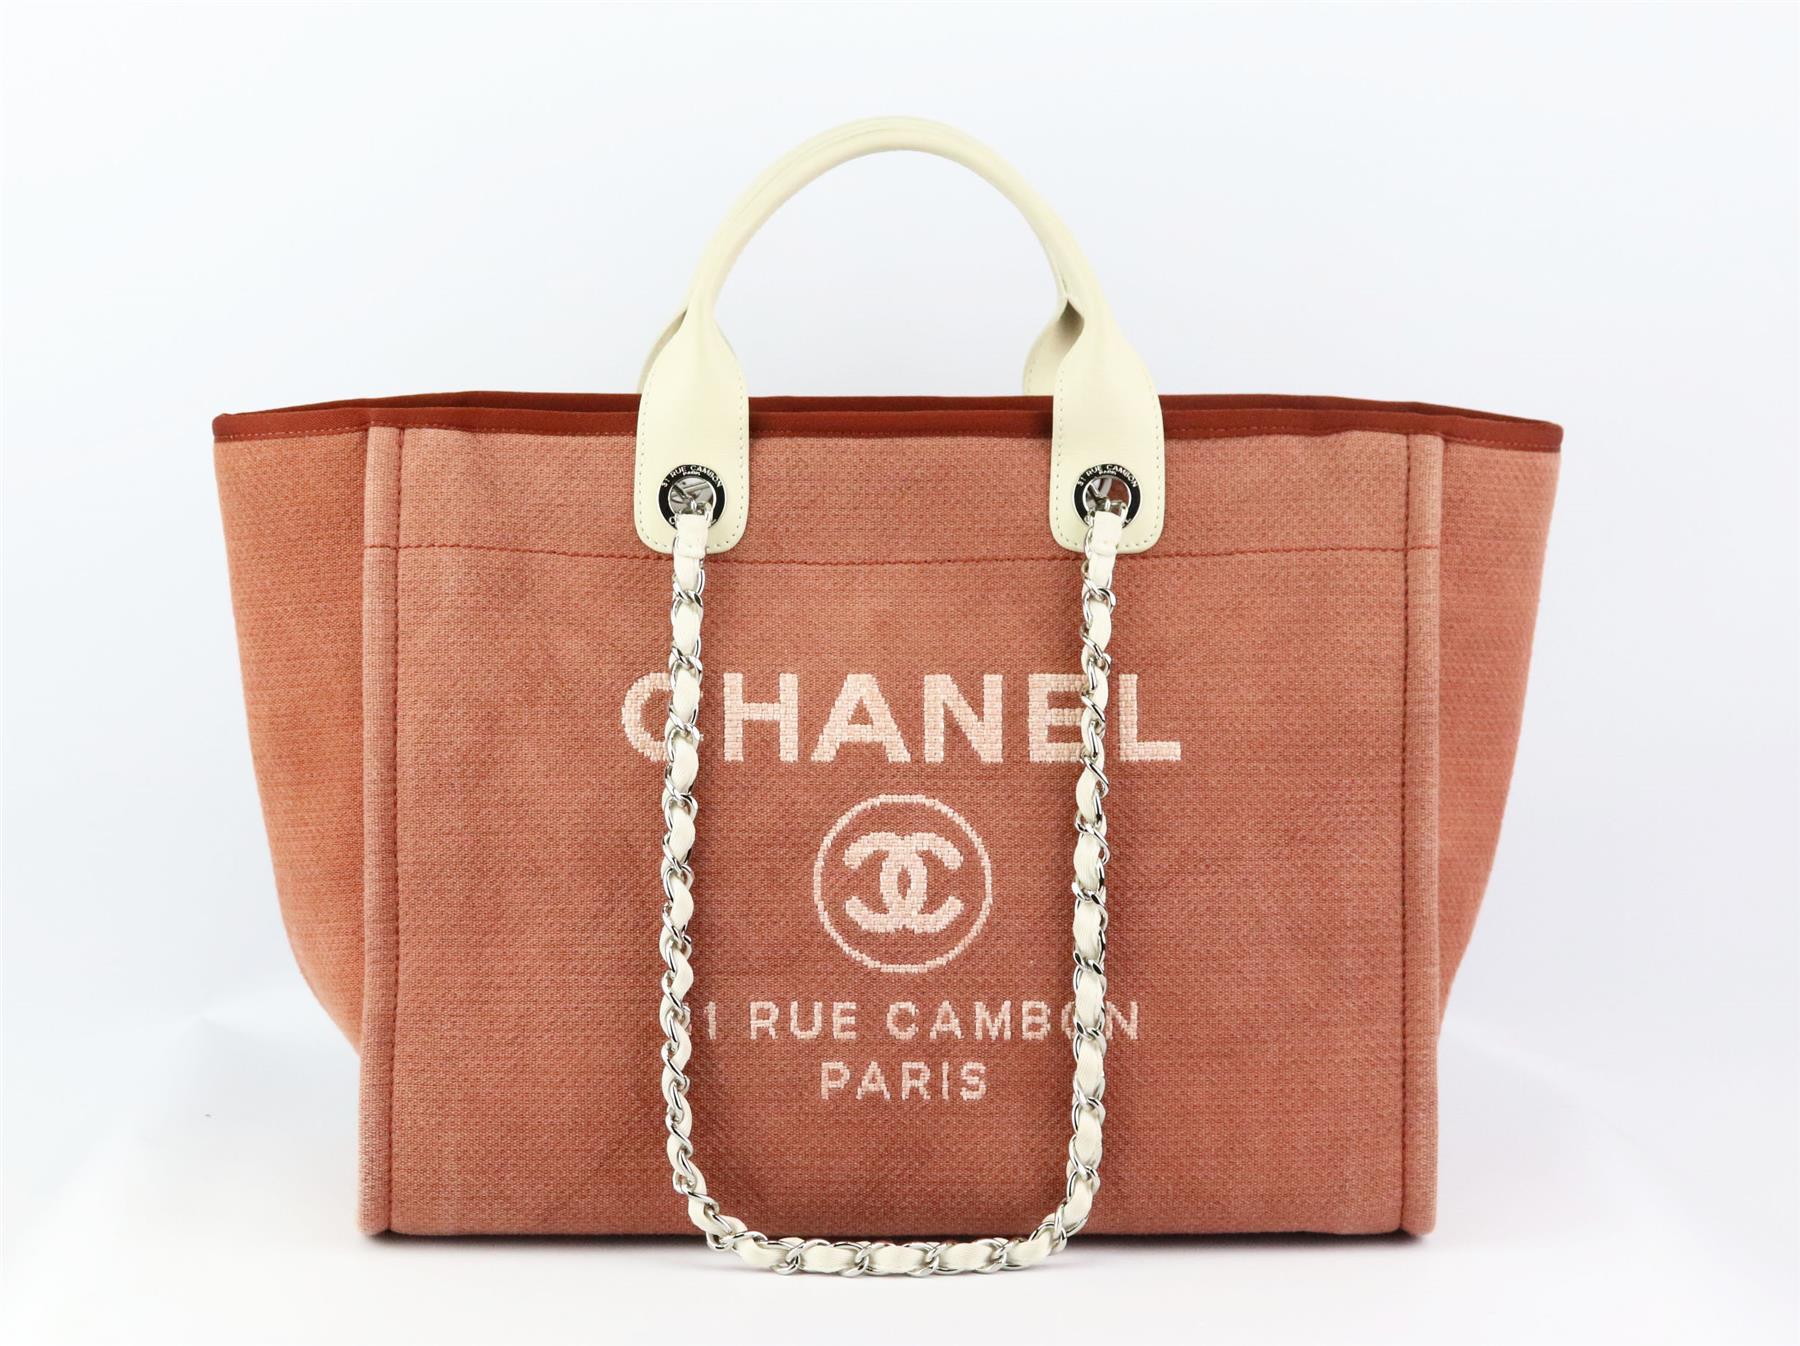 Made in Italy, this beautiful 2013 Chanel Medium ‘Deauville’ tote bag has been made from pink canvas exterior with matching canvas interior, this piece is decorated with a bold ‘CHANEL’ and CC detail on the front, it’s finished with white leather